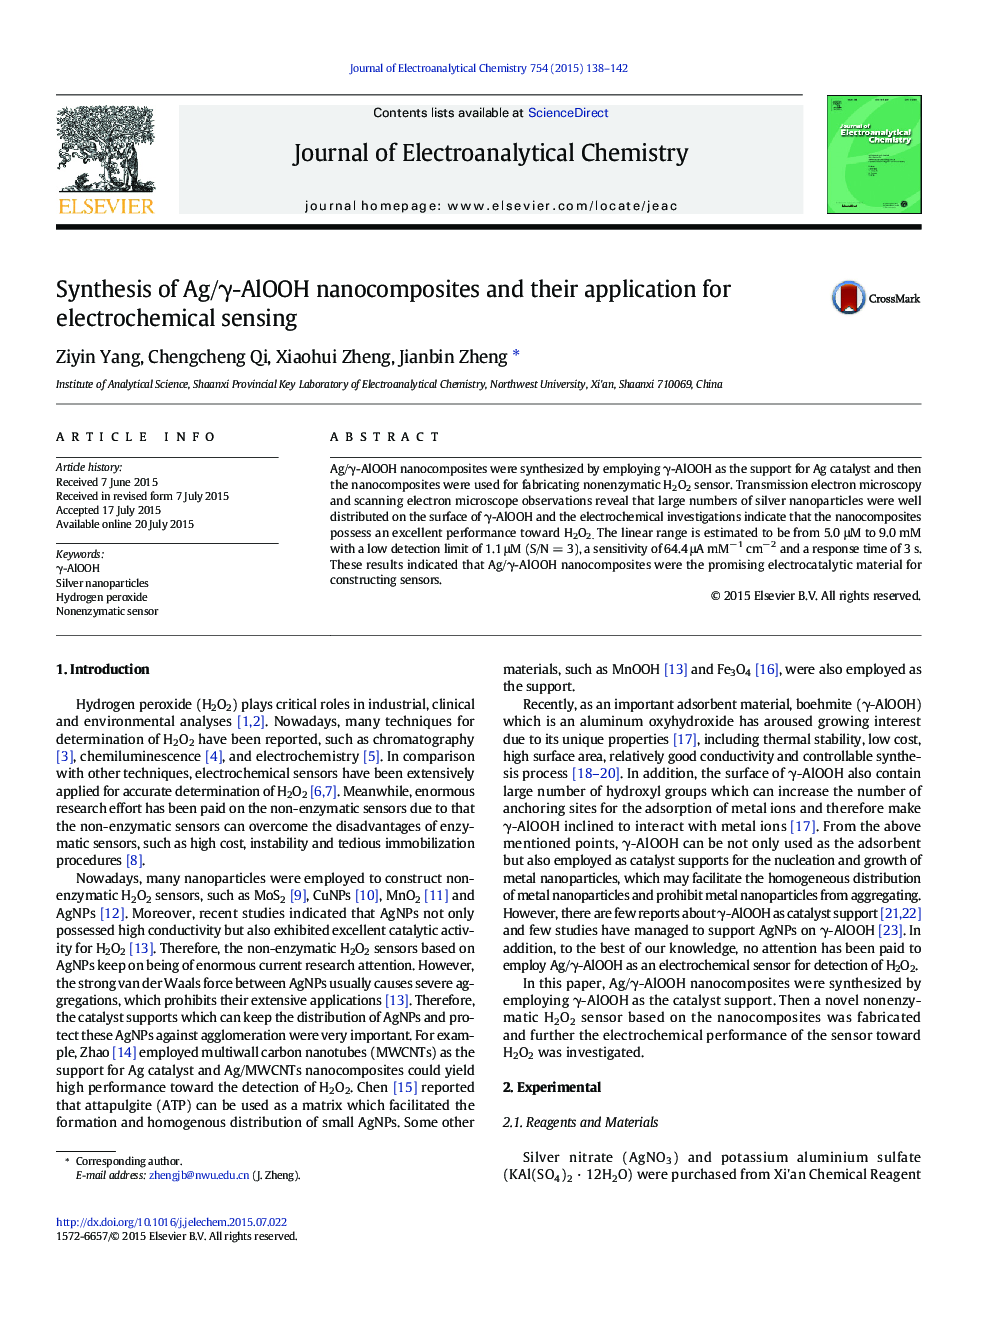 Synthesis of Ag/γ-AlOOH nanocomposites and their application for electrochemical sensing